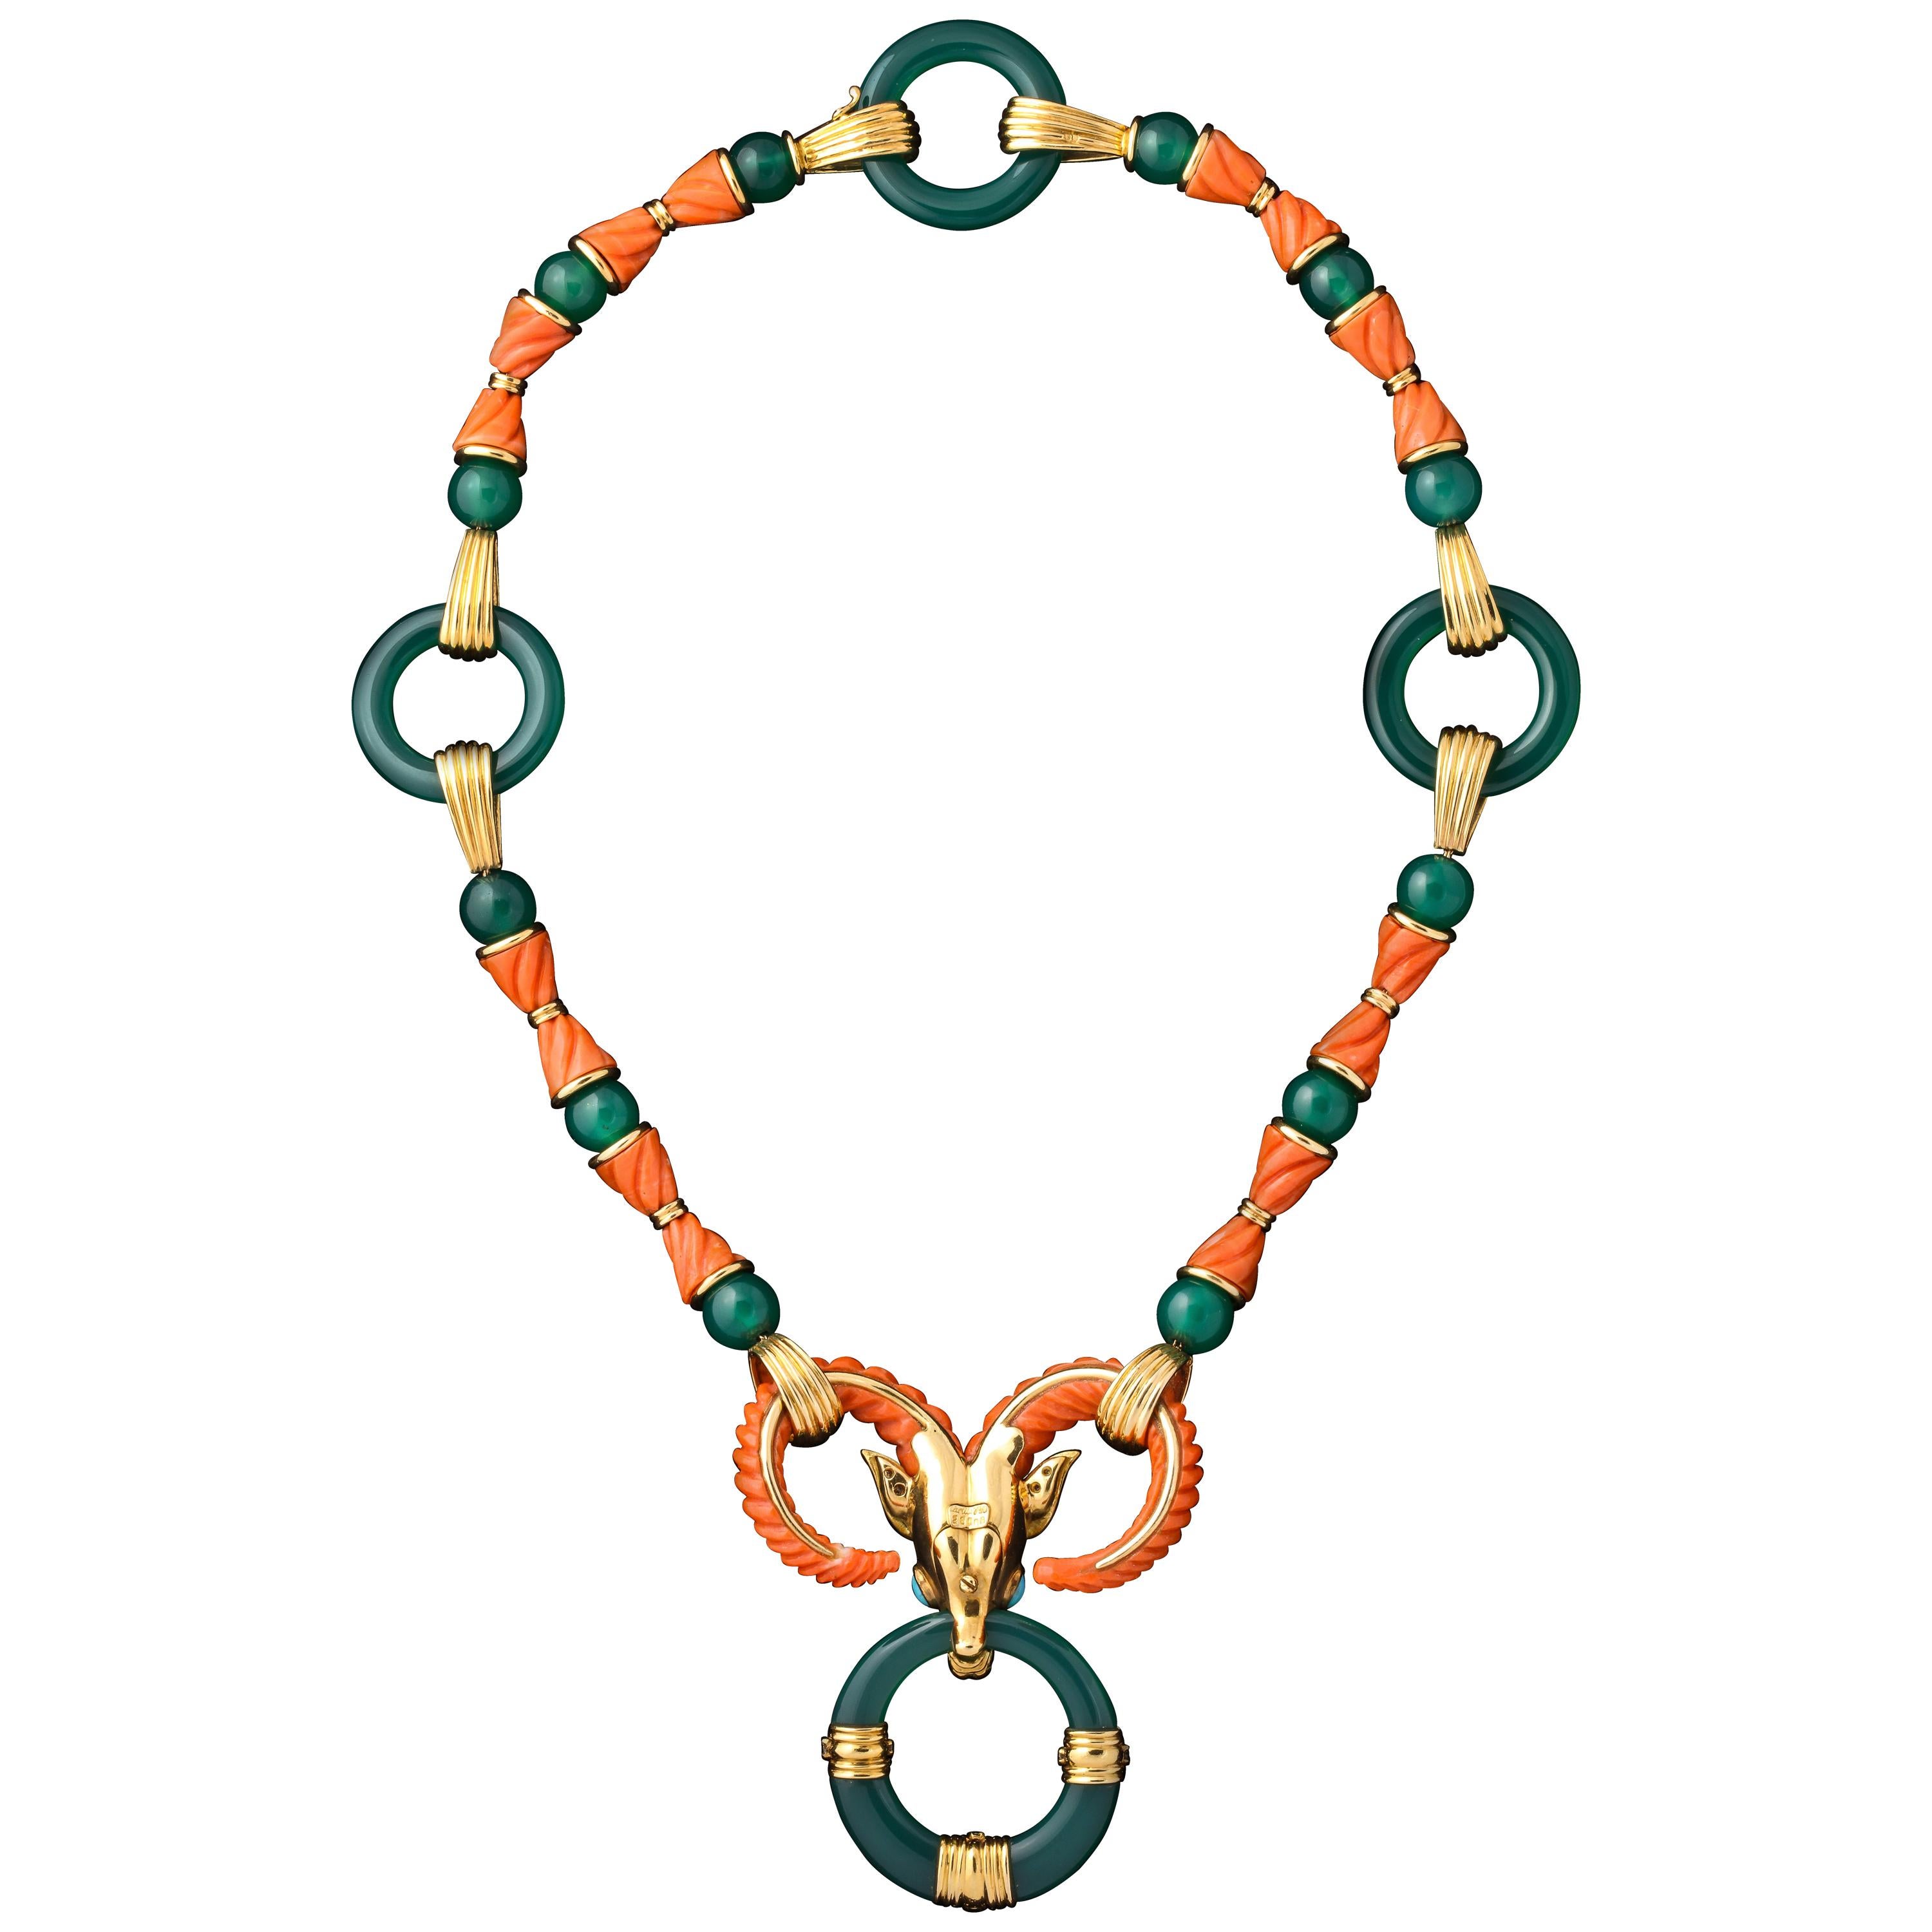 An articulate Cartier necklace with coral and chyroprase depicting an ox. The ox is adorned with brilliant diamonds, and cabochon turquoise for its eyes.